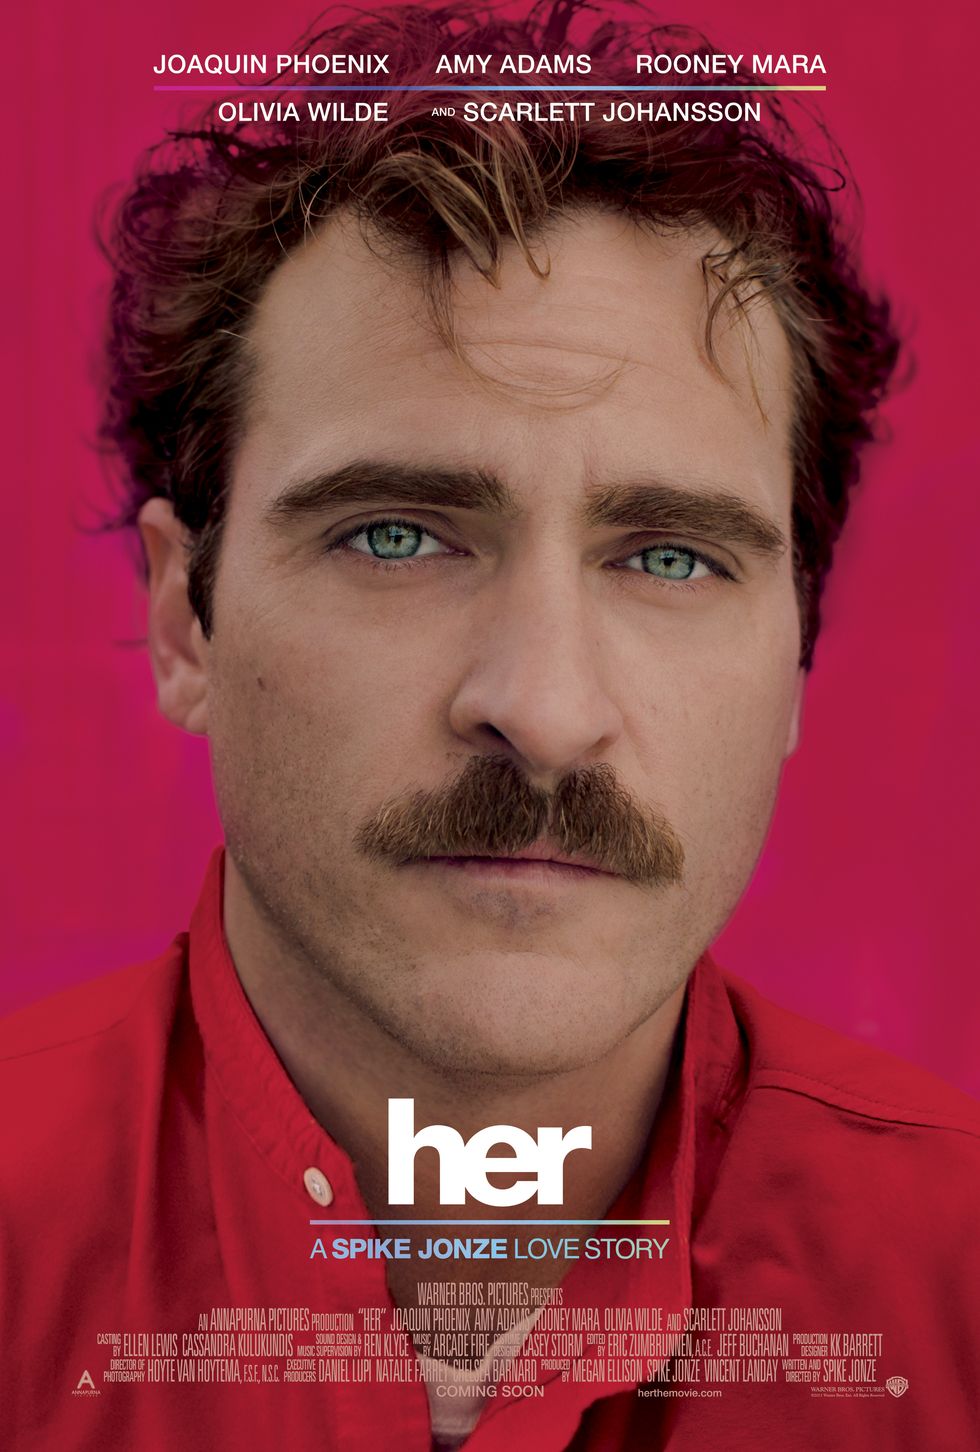 joaquin phoenix as theodore in the romantic drama her, directed by spike jonze, a warner bros pictures release poster